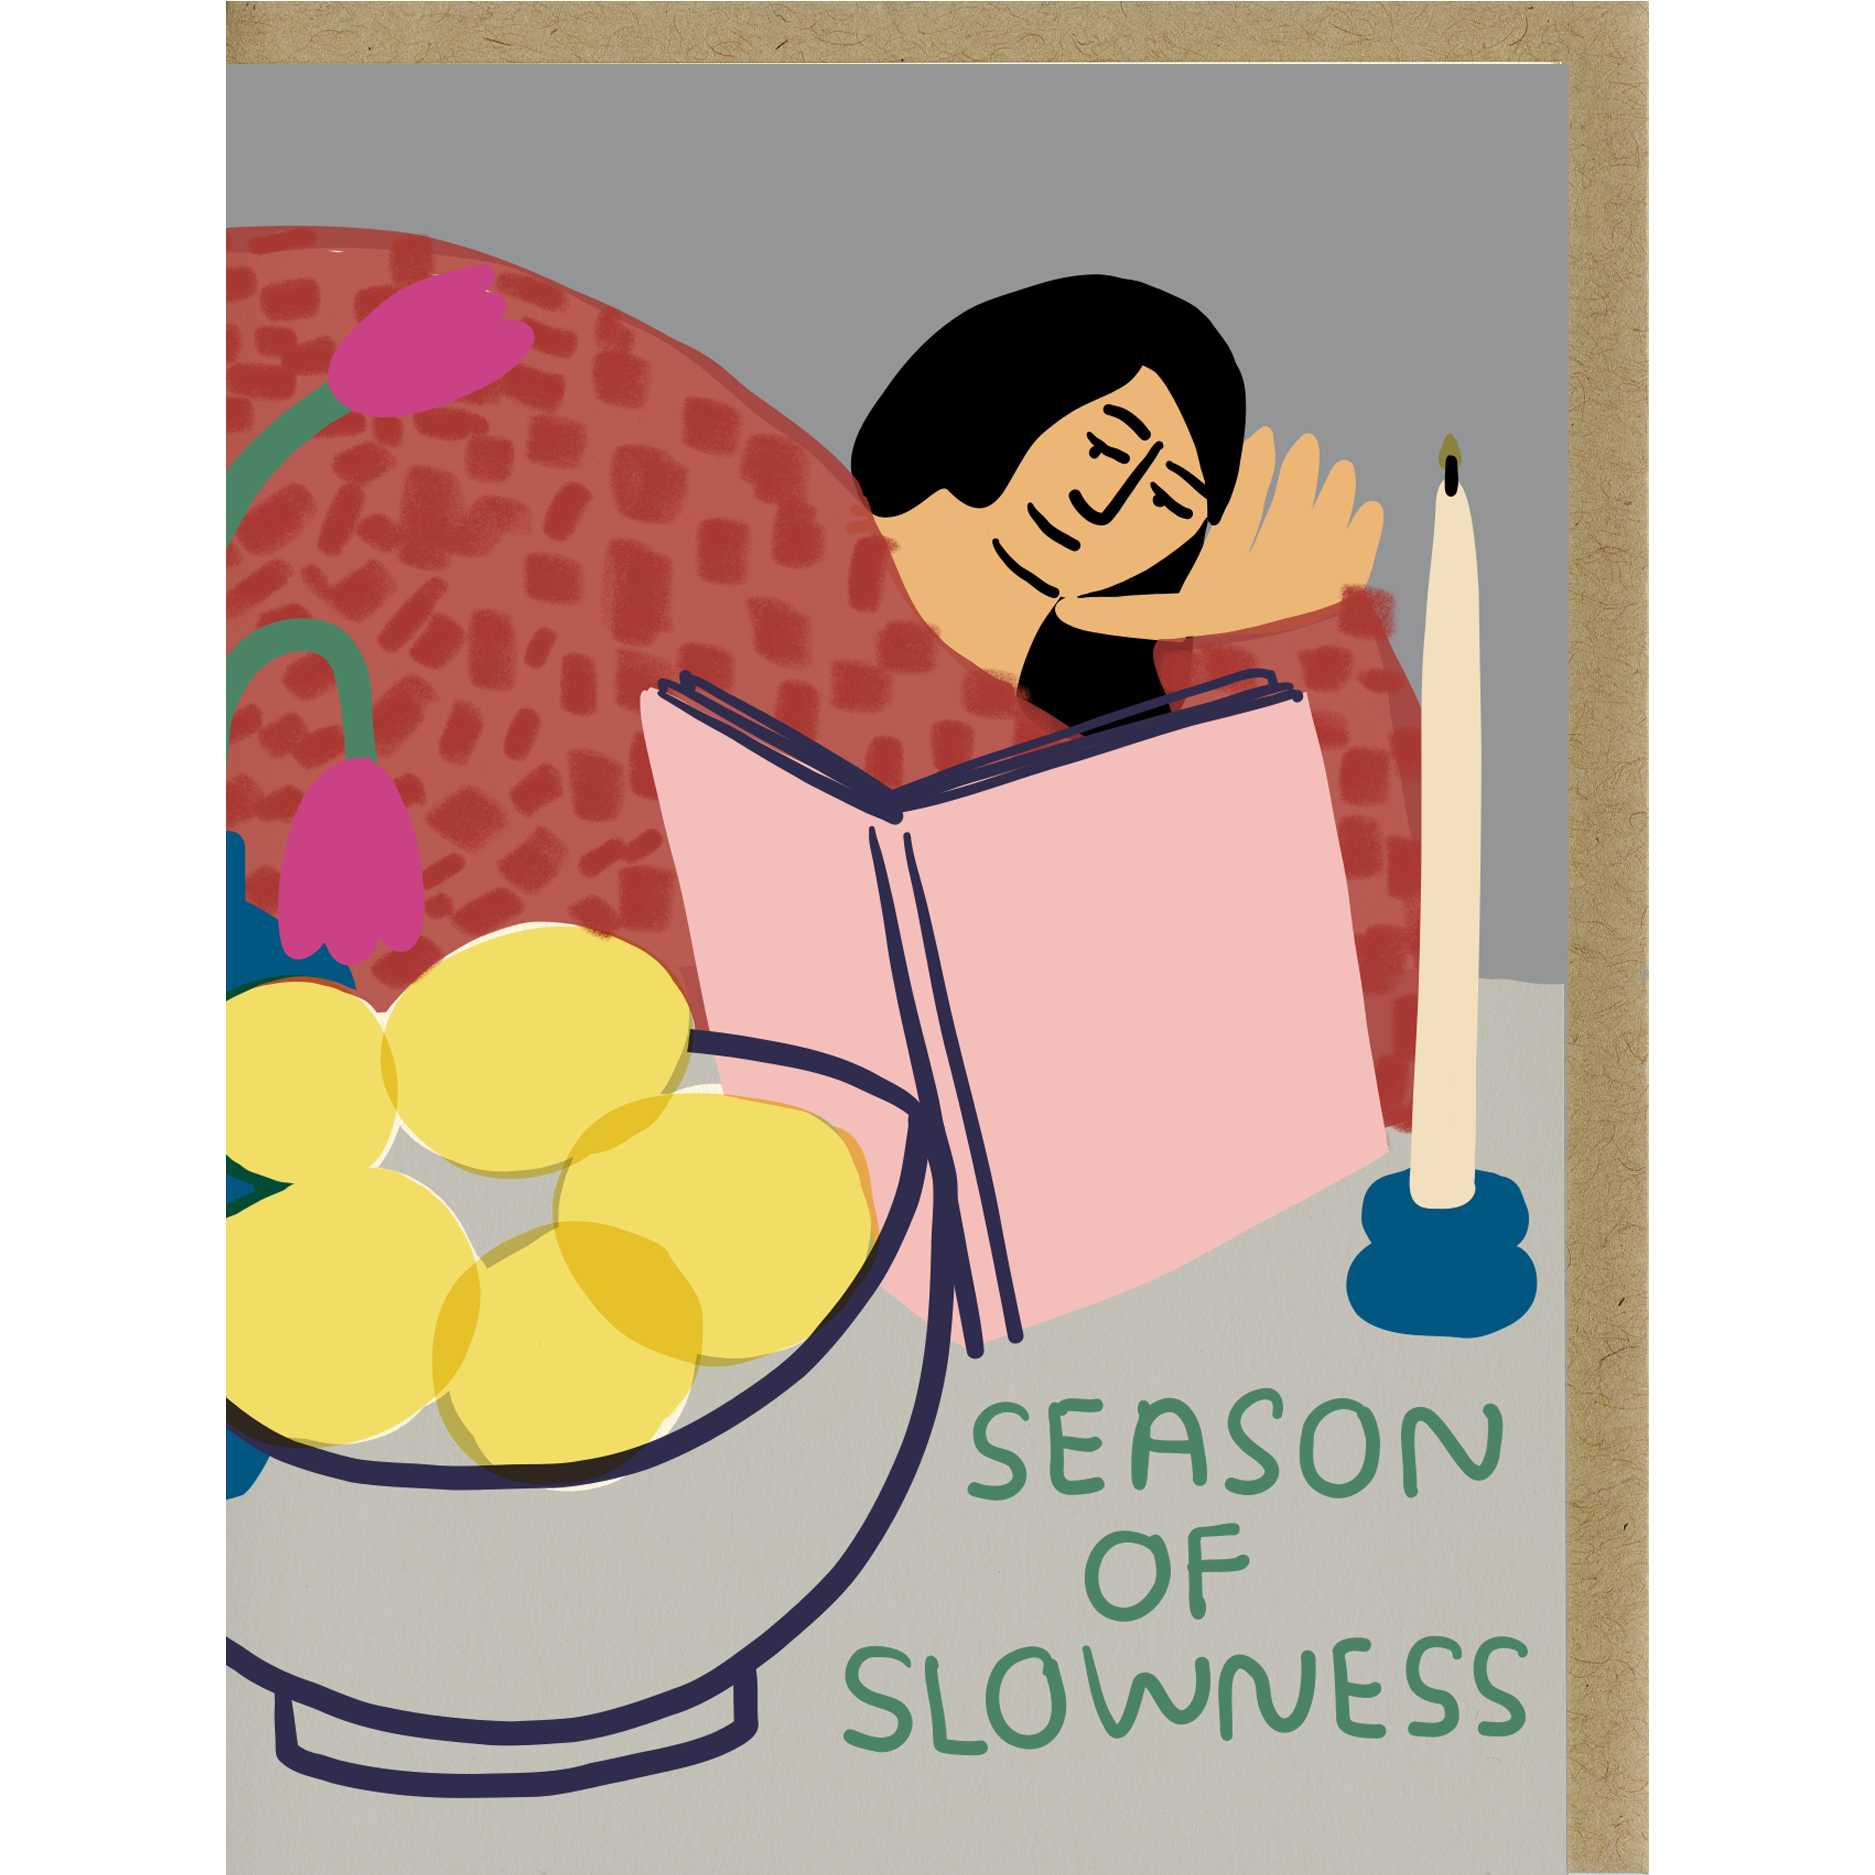 Slowness　Card　Kindred　Season　Post　of　–